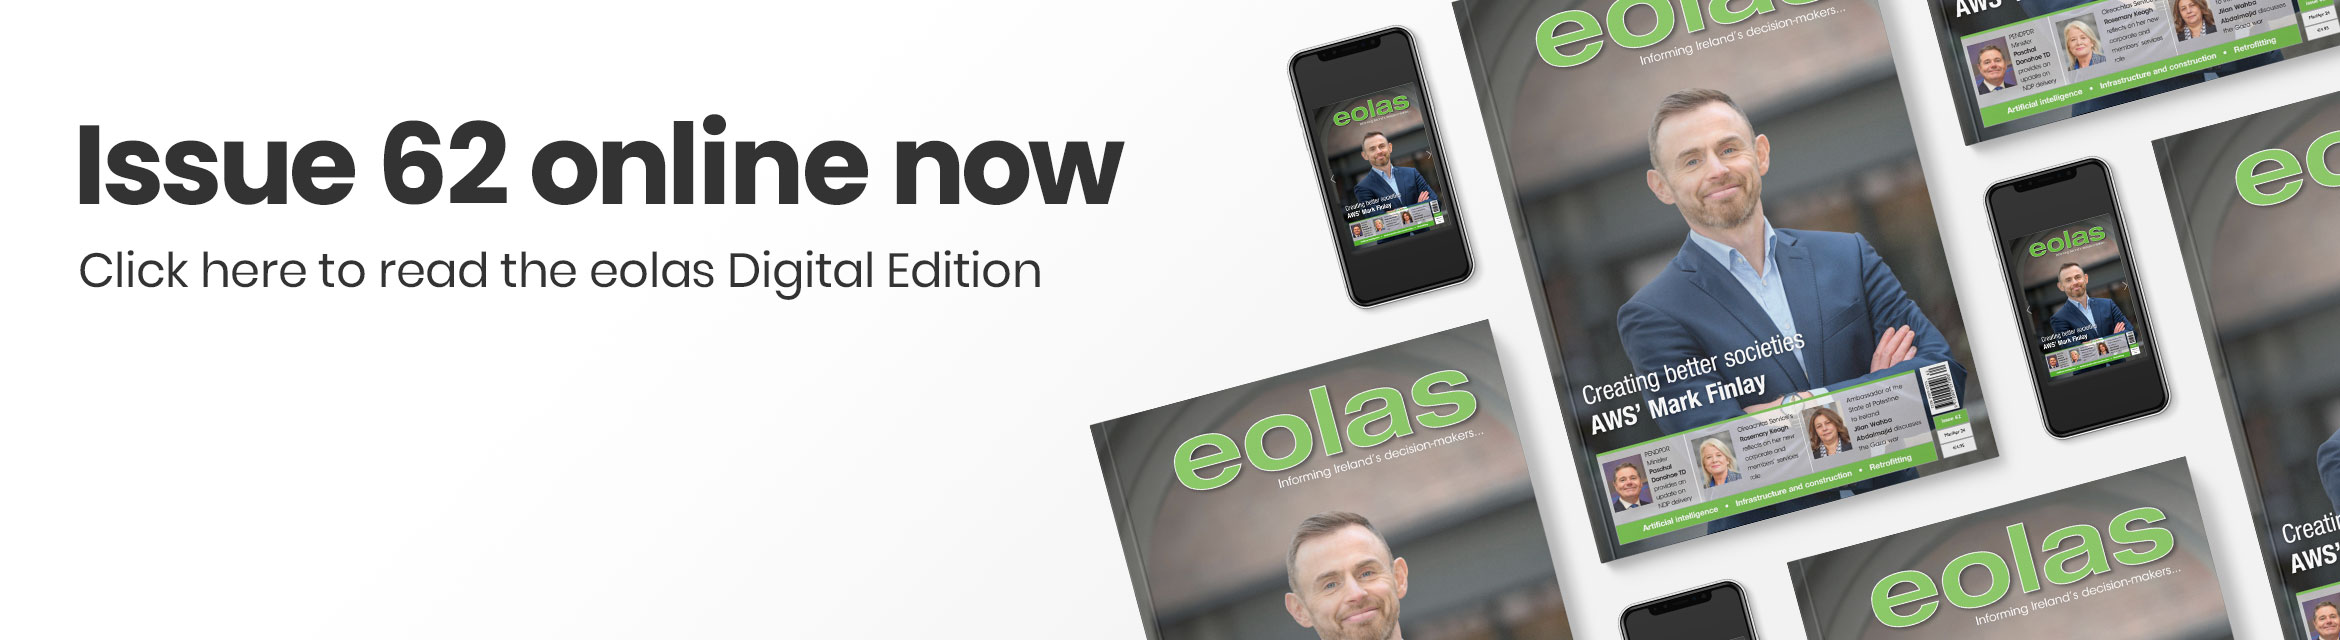 Issue 62 online now • Read the eolas Digital Edition